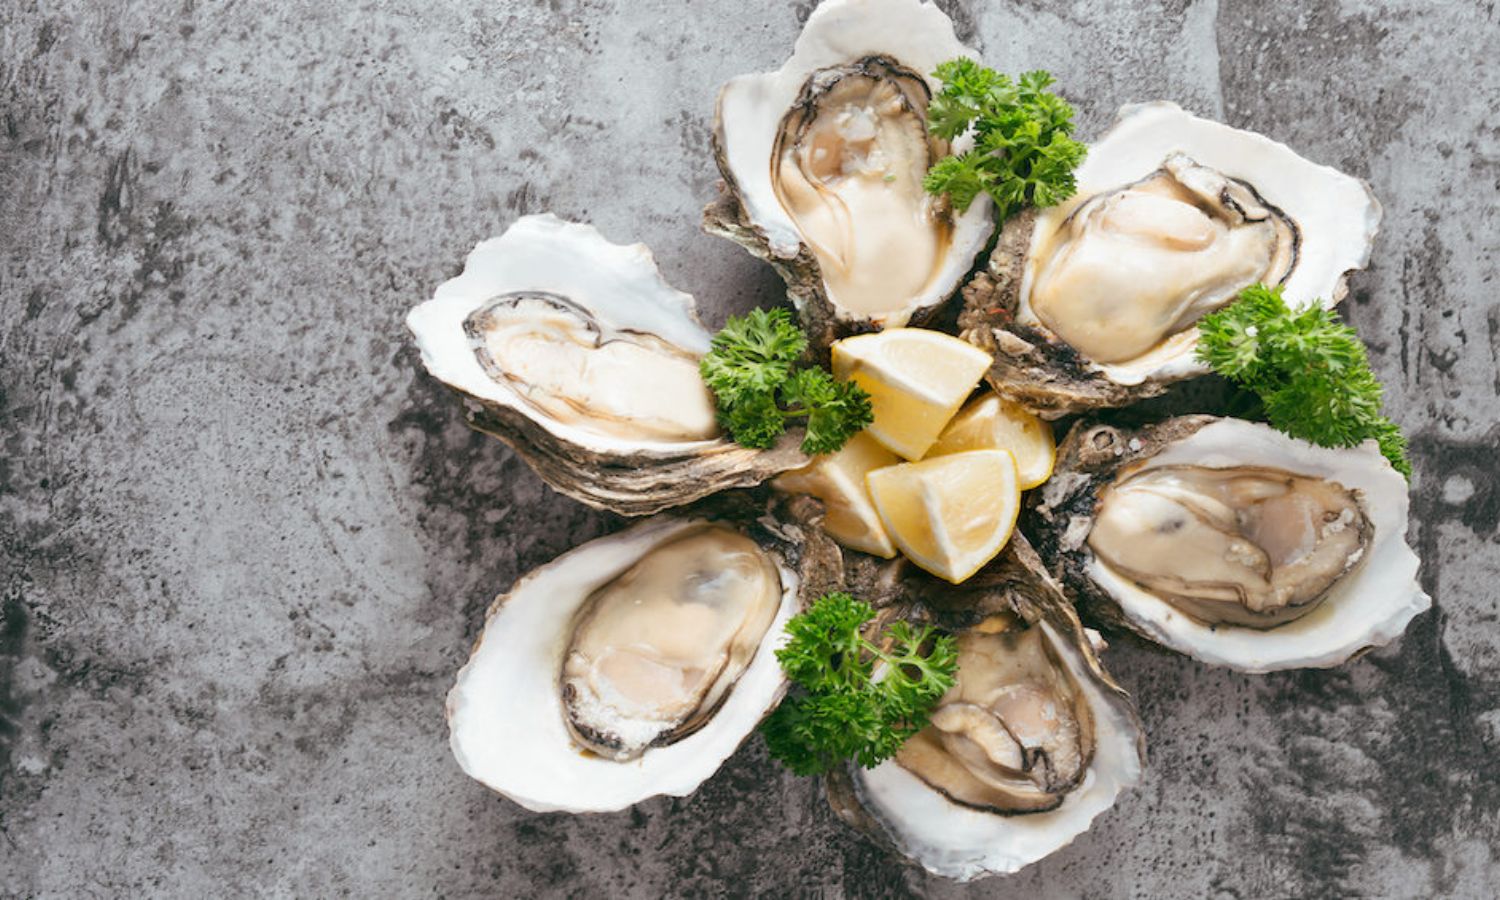 California Issues Warning on Raw Oysters